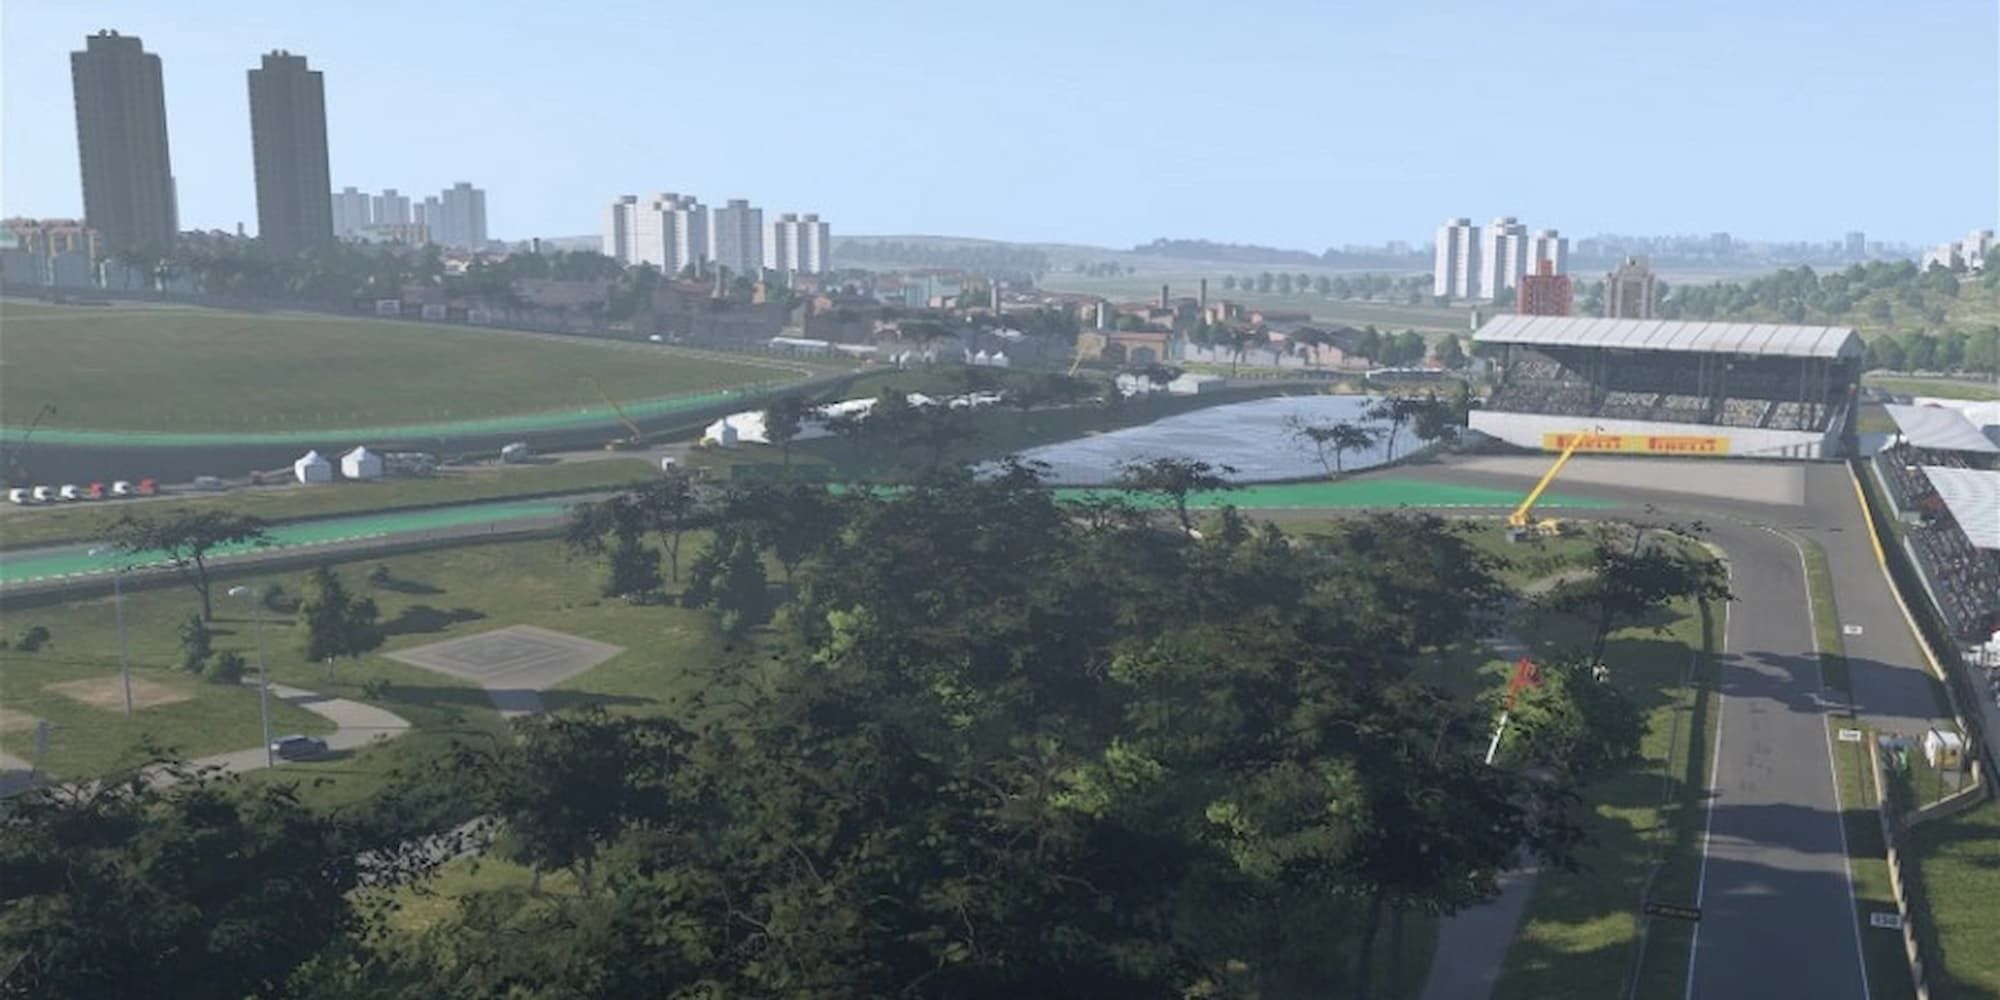 Interlagos's turns sit between two lakes with the skyline of Sao Paulo, Brazil in the background.